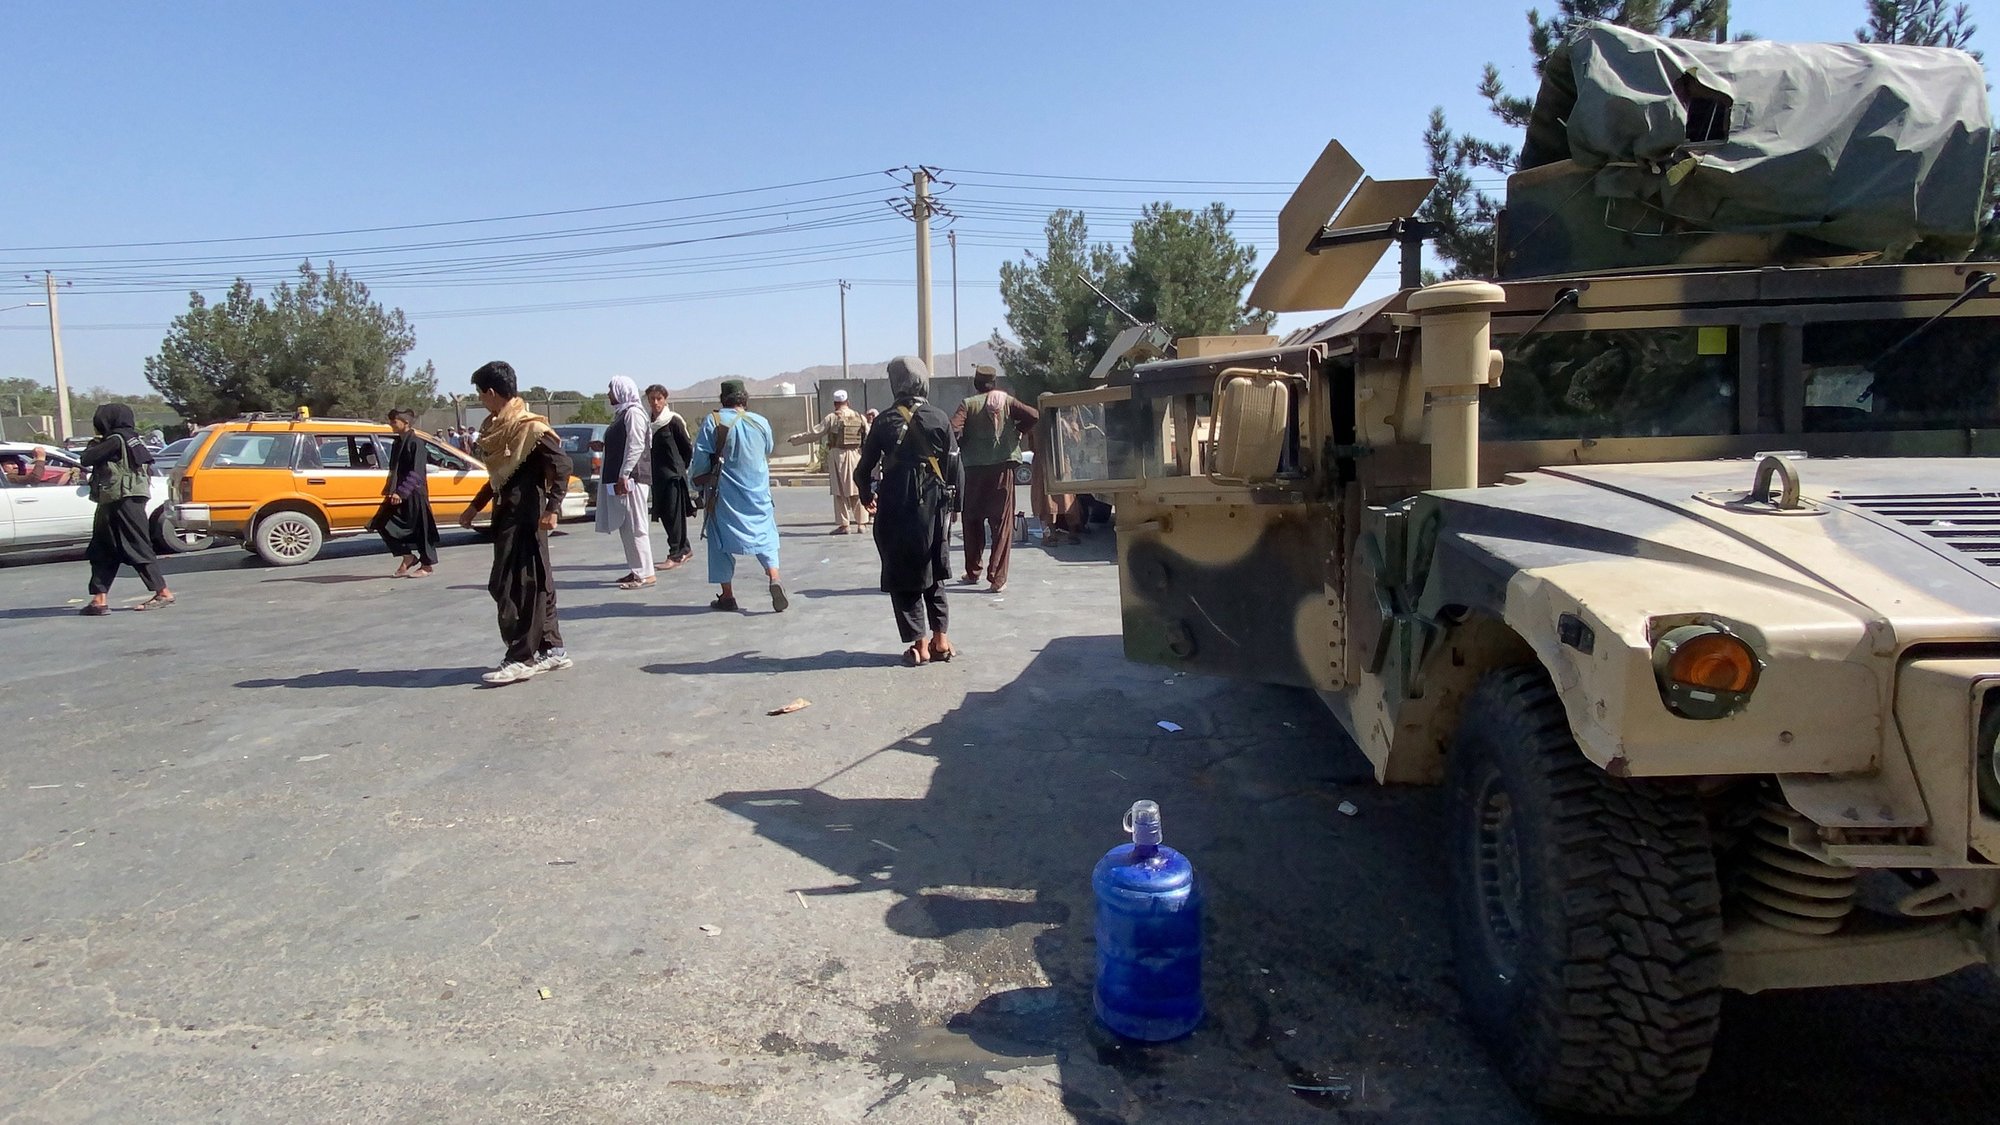 epa09431753 Taliban stand guard as they block the road to Hamid Karzai Airport a day after deadly blasts, in Kabul, Afghanistan, 27 August 2021. Two explosions outside Kabul&#039;s international airport on 26 August left more than 60 Afghan civilians dead and 140 others wounded, while the United States military said that 12 of its personnel died.  EPA/STRINGER